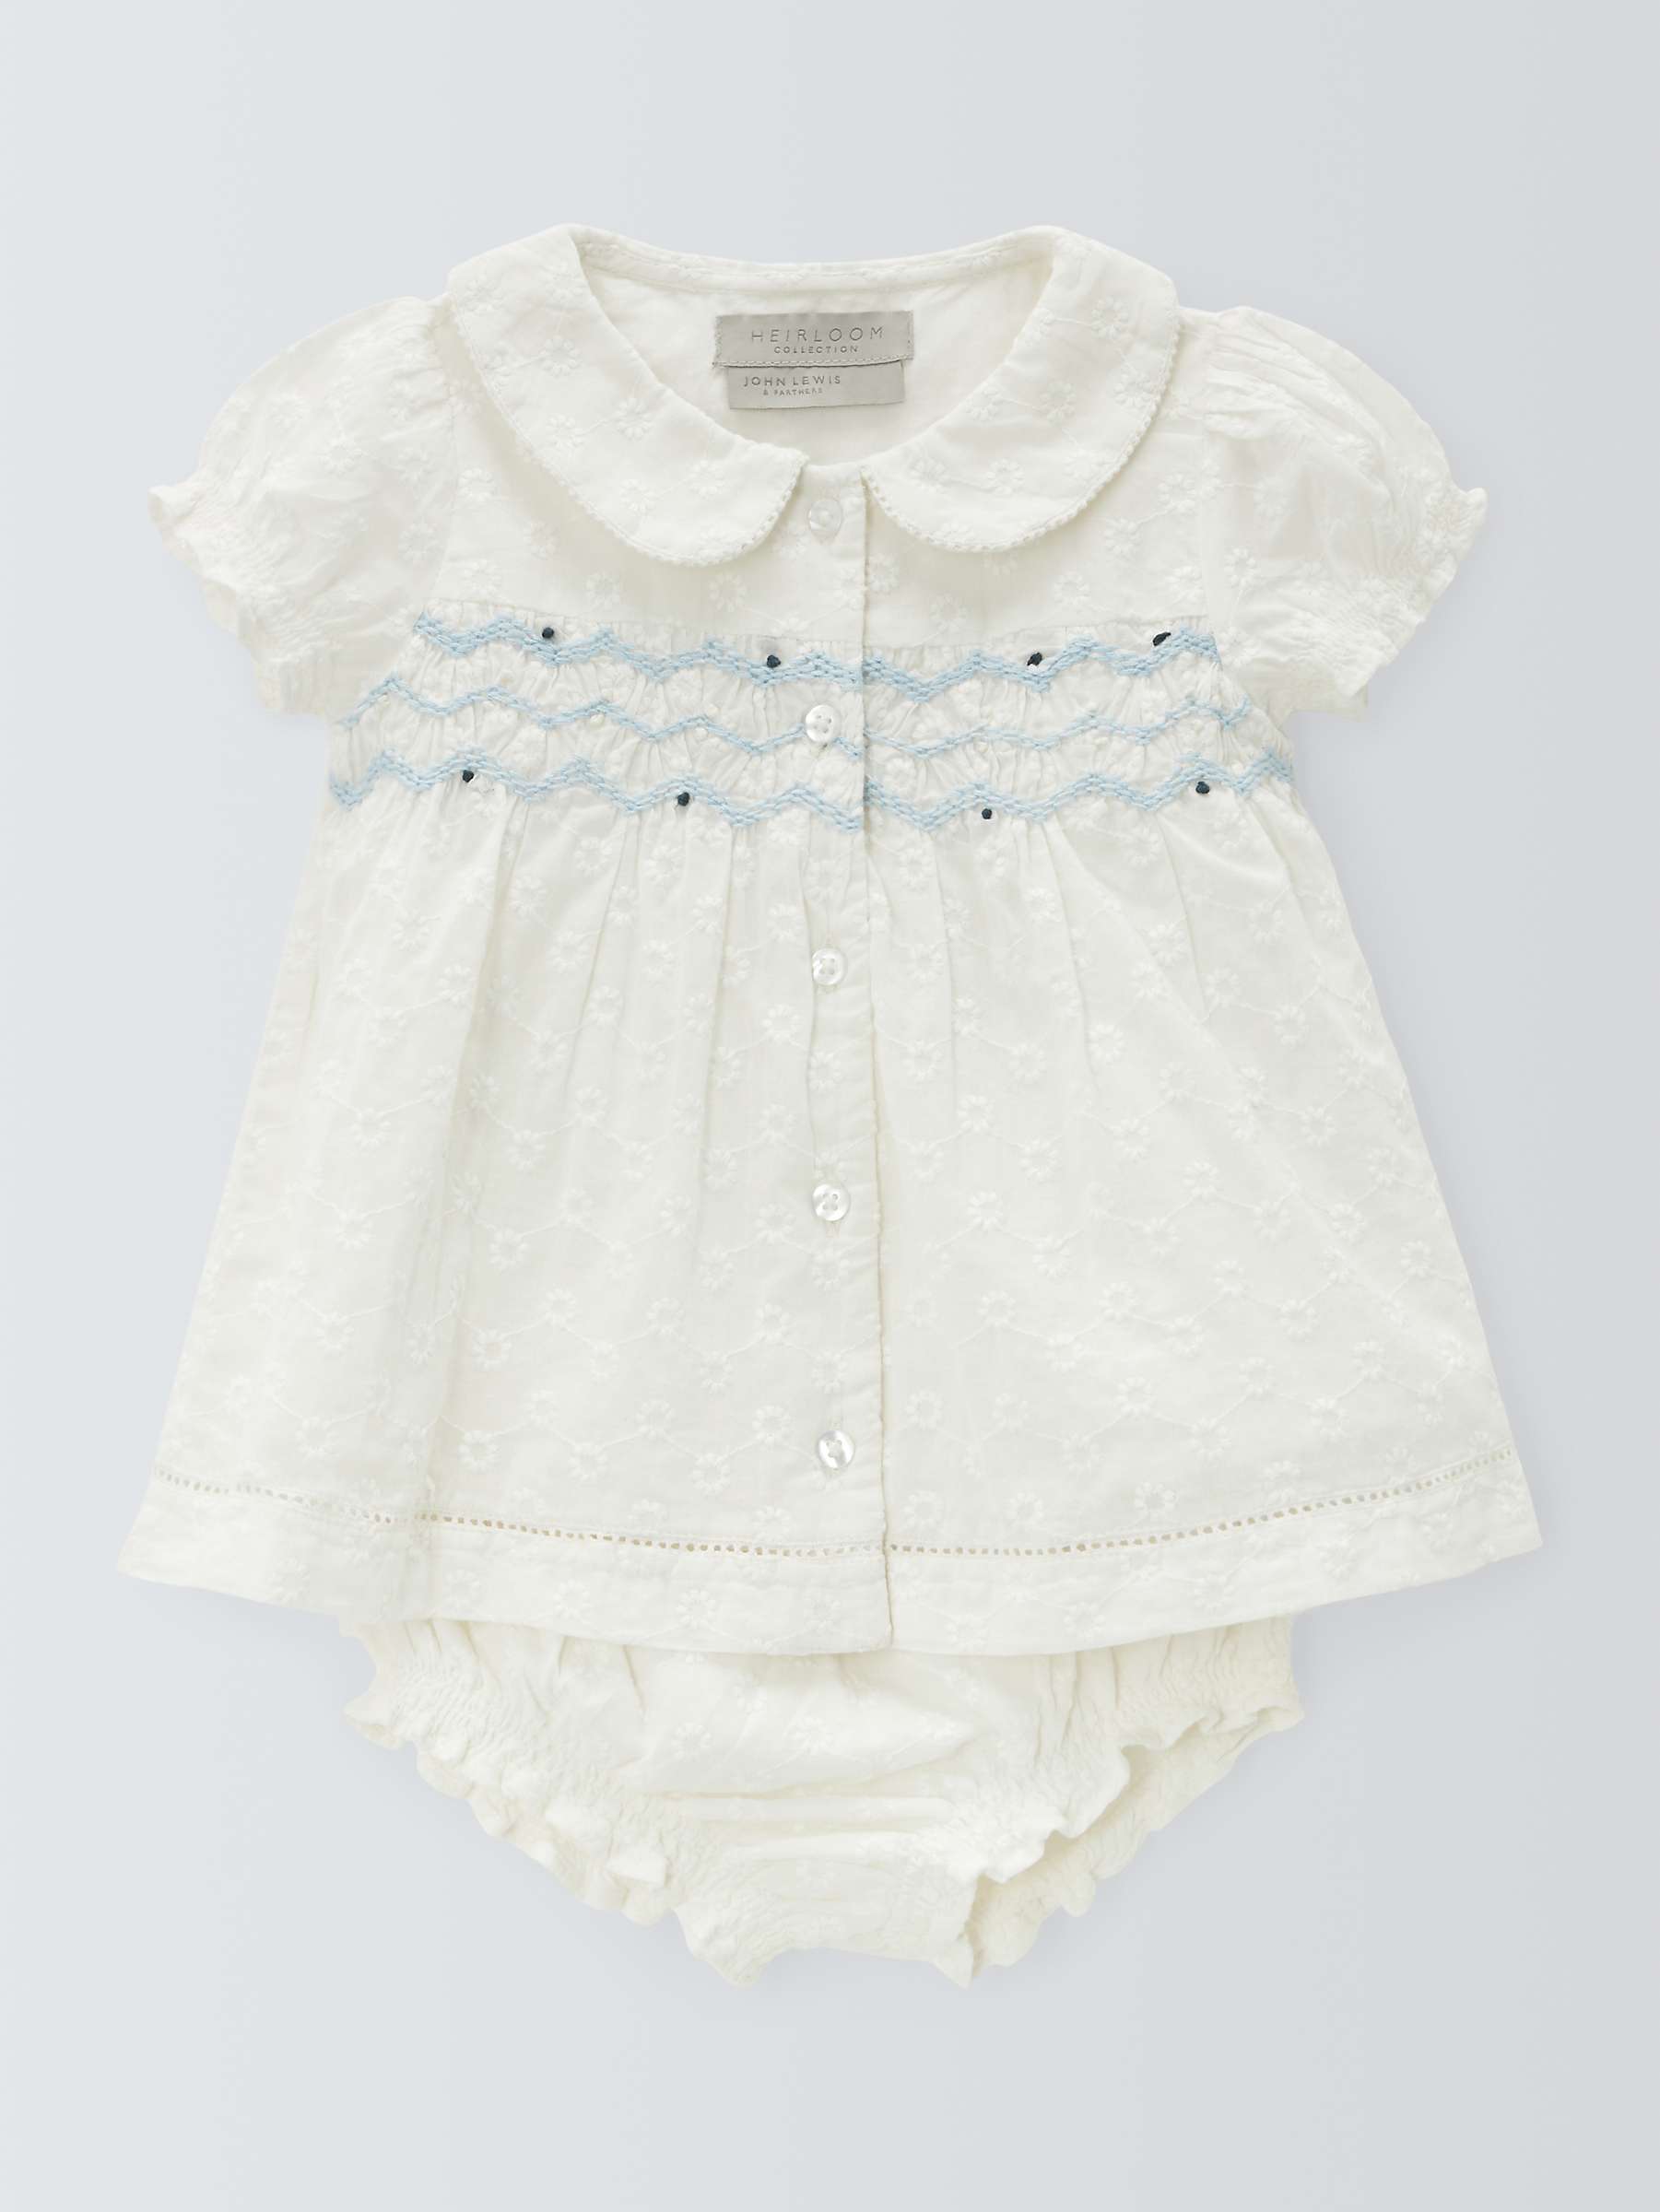 Buy John Lewis Heirloom Collection Baby Cotton Embroidered Dress and Bloomers Set, Cream Online at johnlewis.com